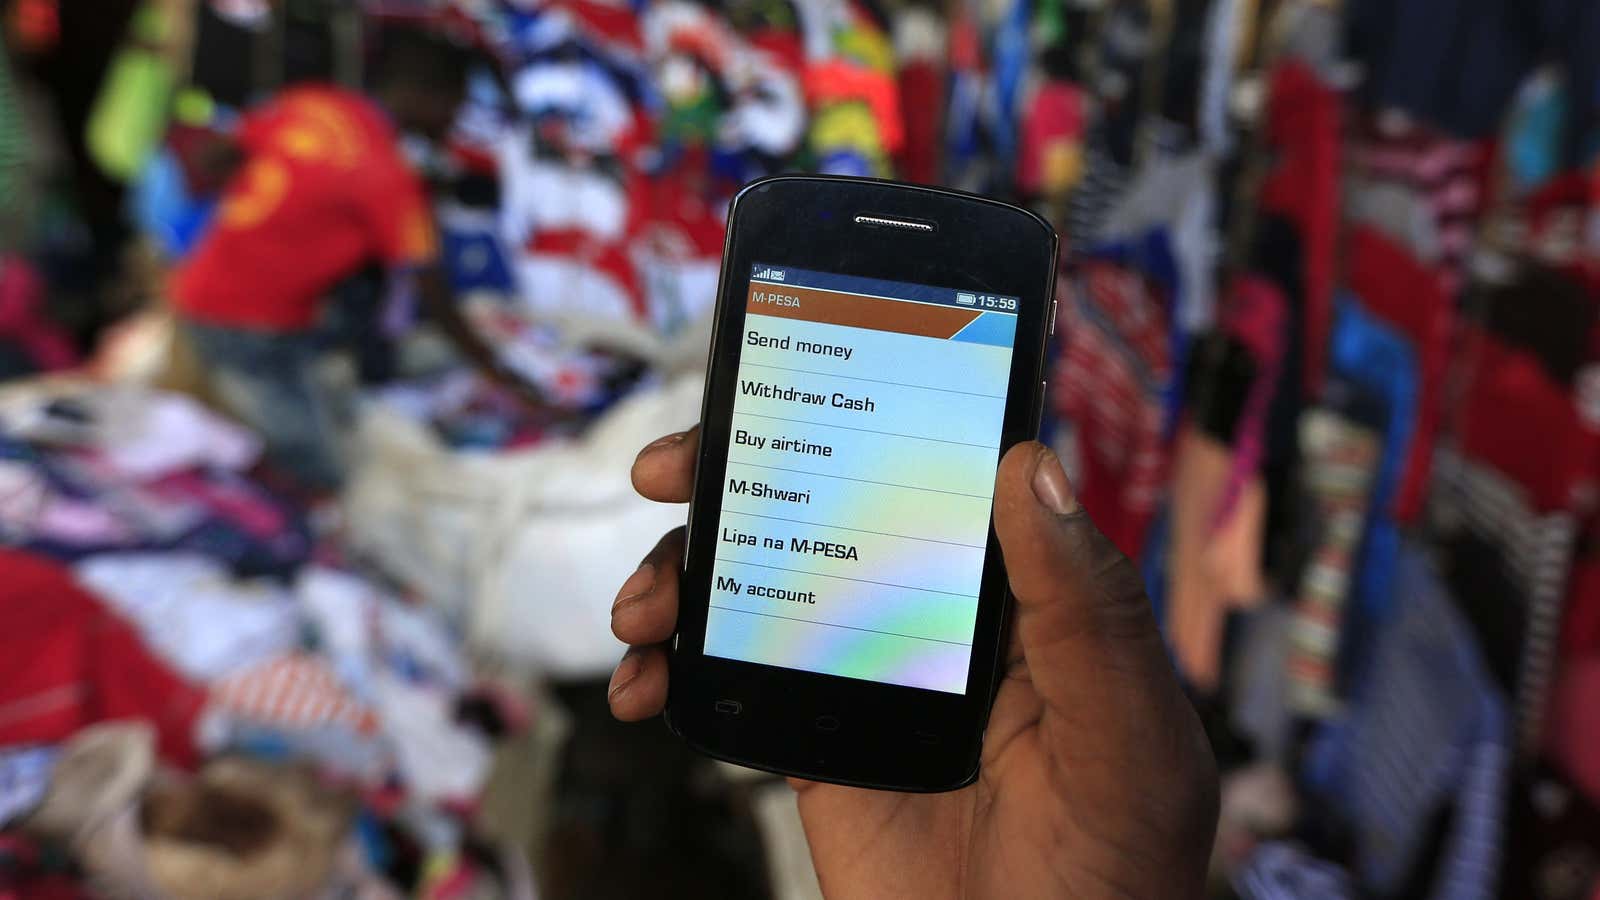 Mobile growth is still growing fast in Africa and governments want a bigger cut